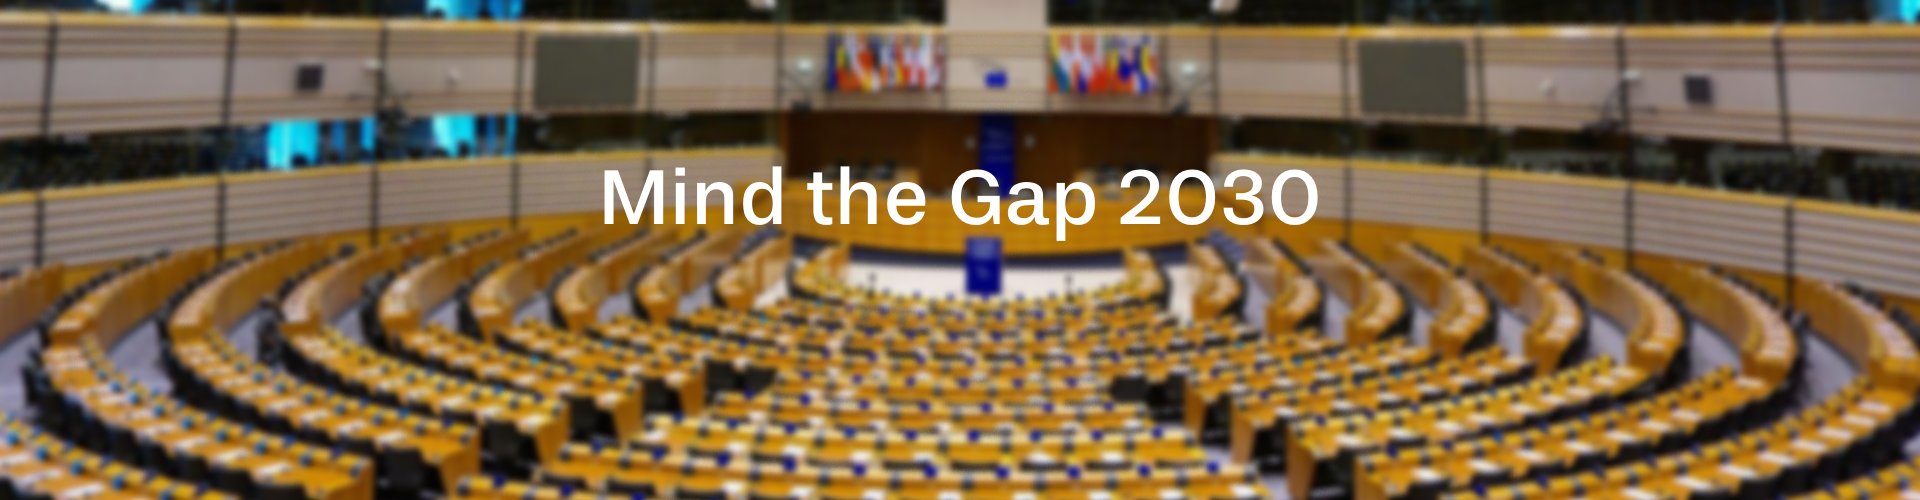 Hemicycle European Parliament with text: Mind the Gap 2030